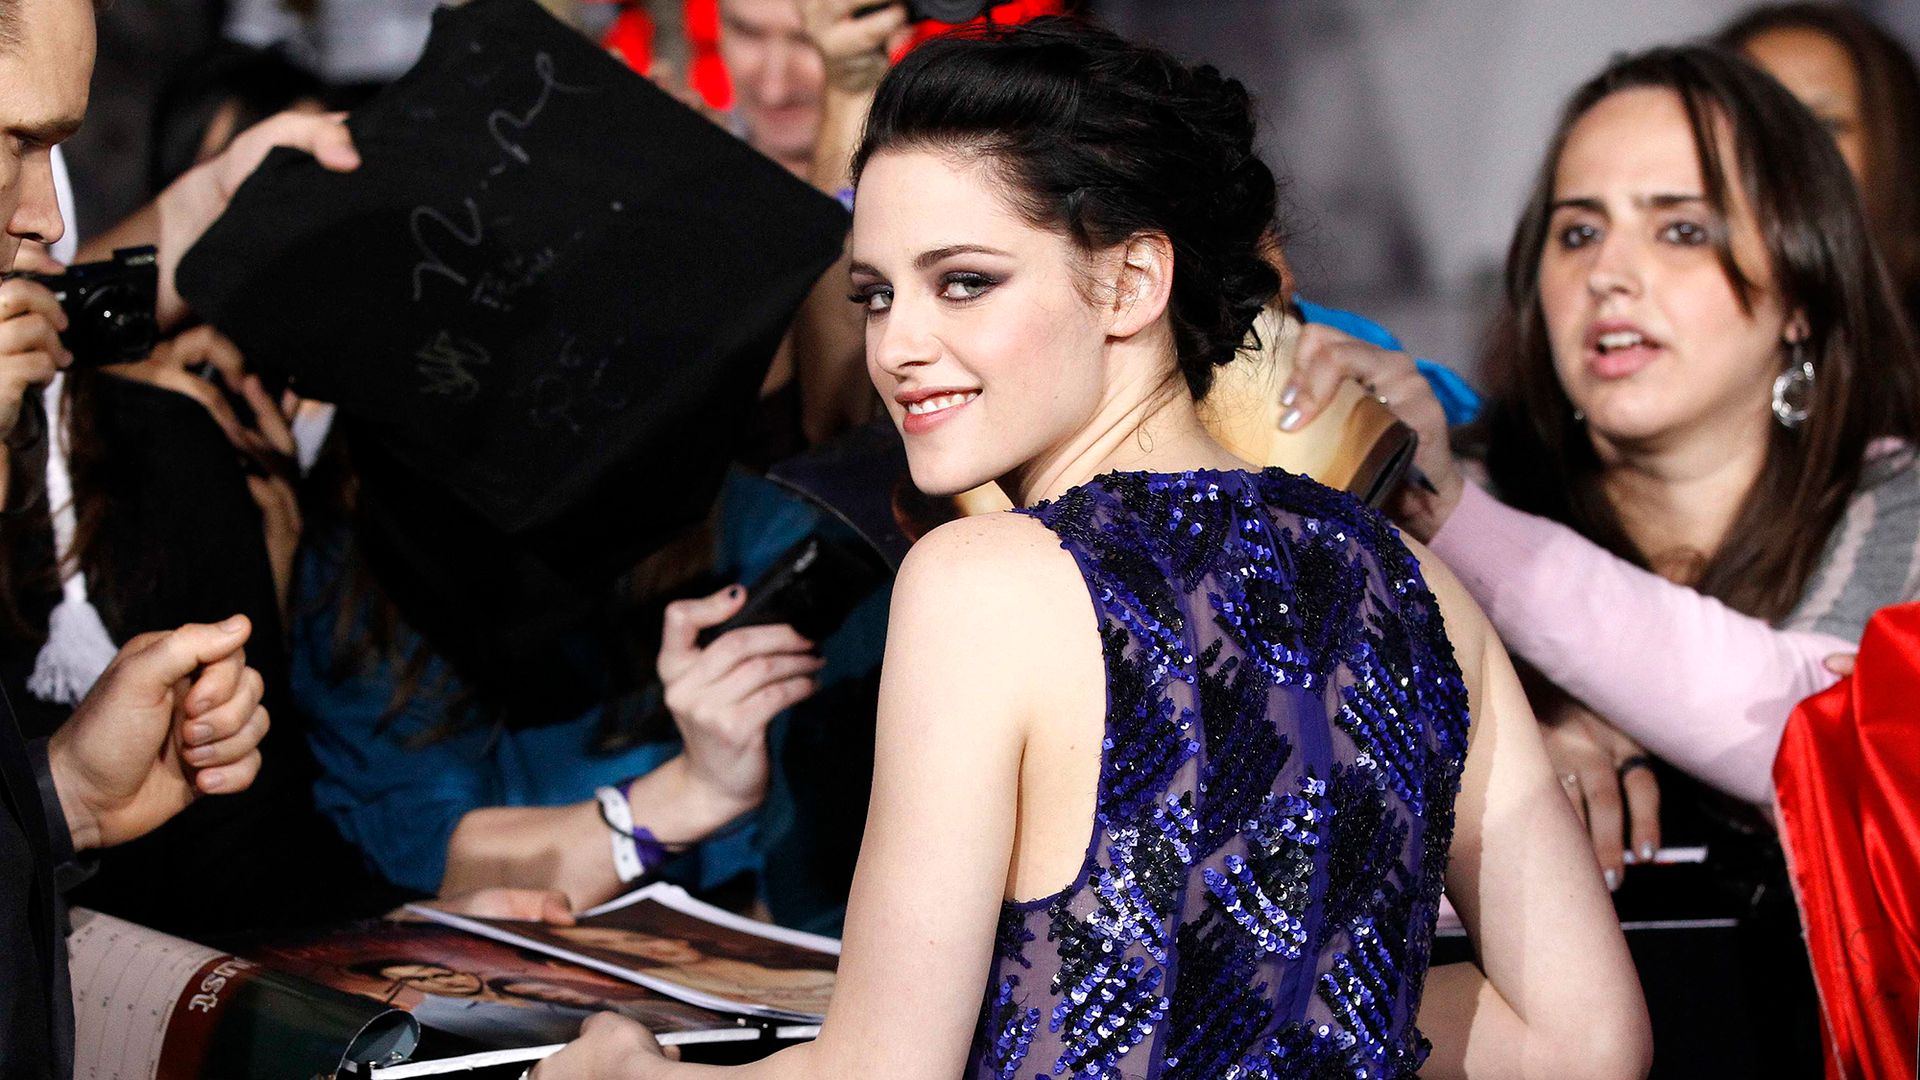 In 2008, Kristen Stewart was the most popular young actress in Hollywood